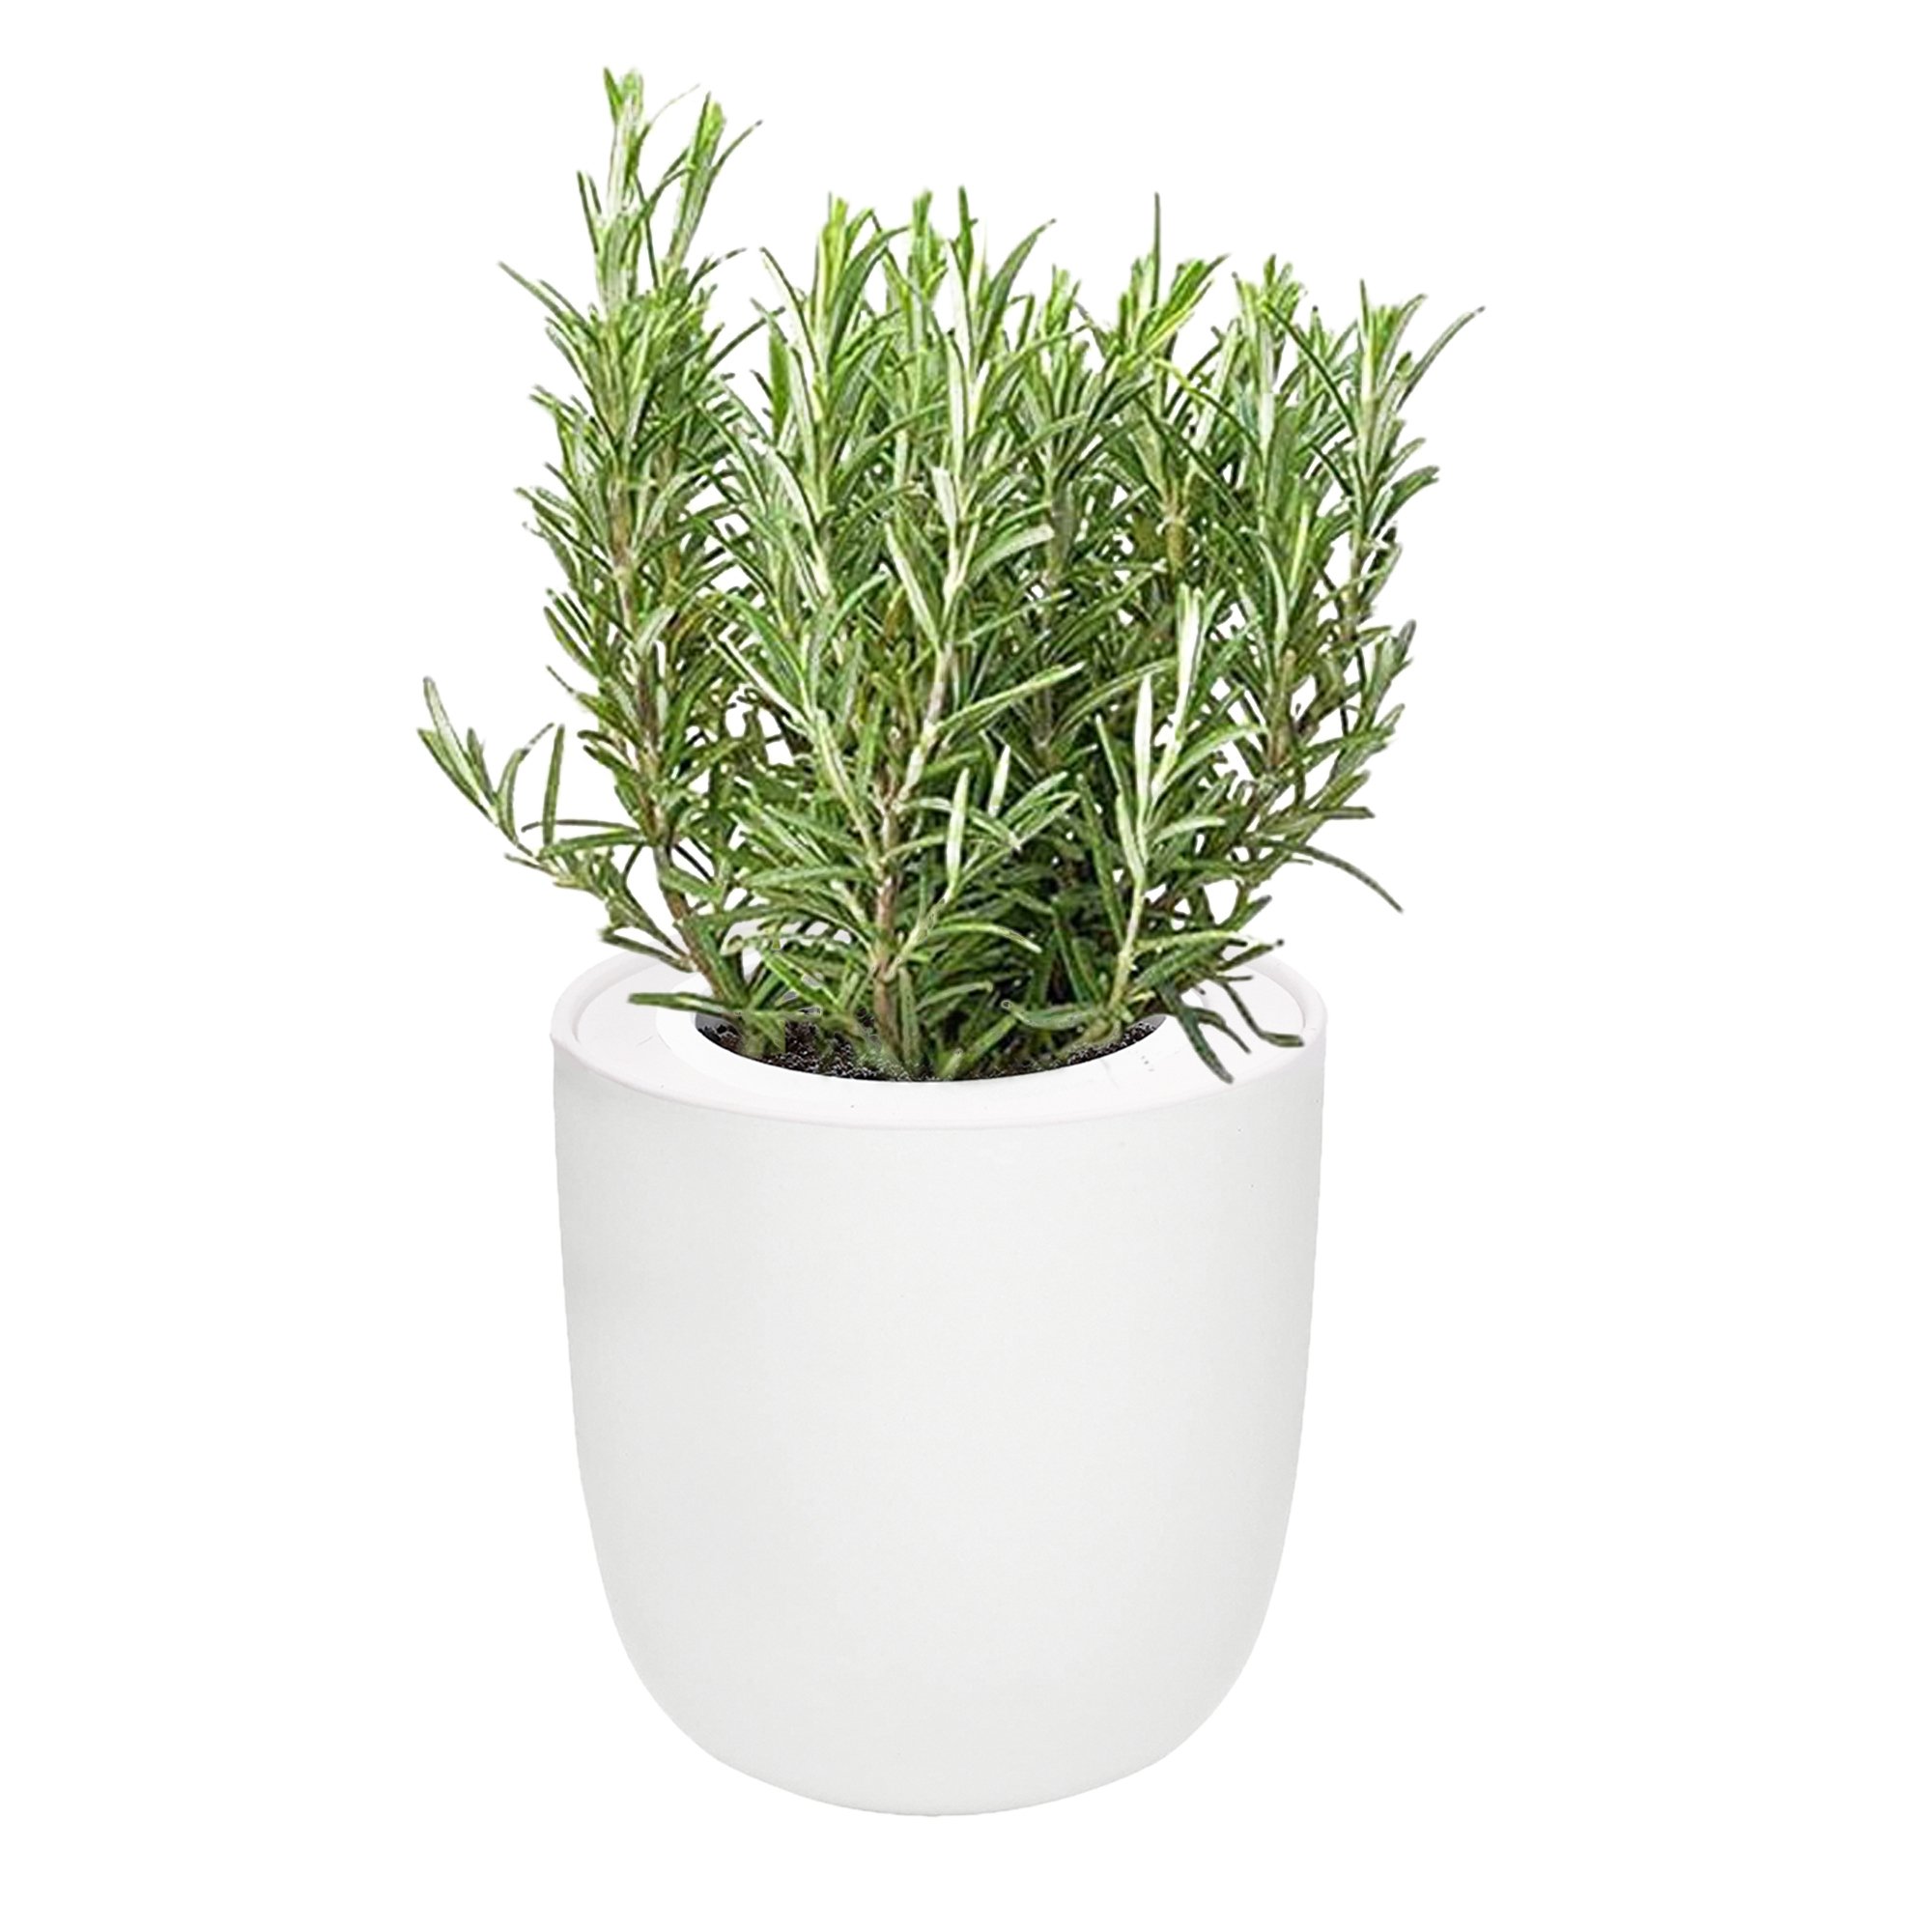 Rosemary White Ceramic Pot Hydroponic Growing Kit with Seeds